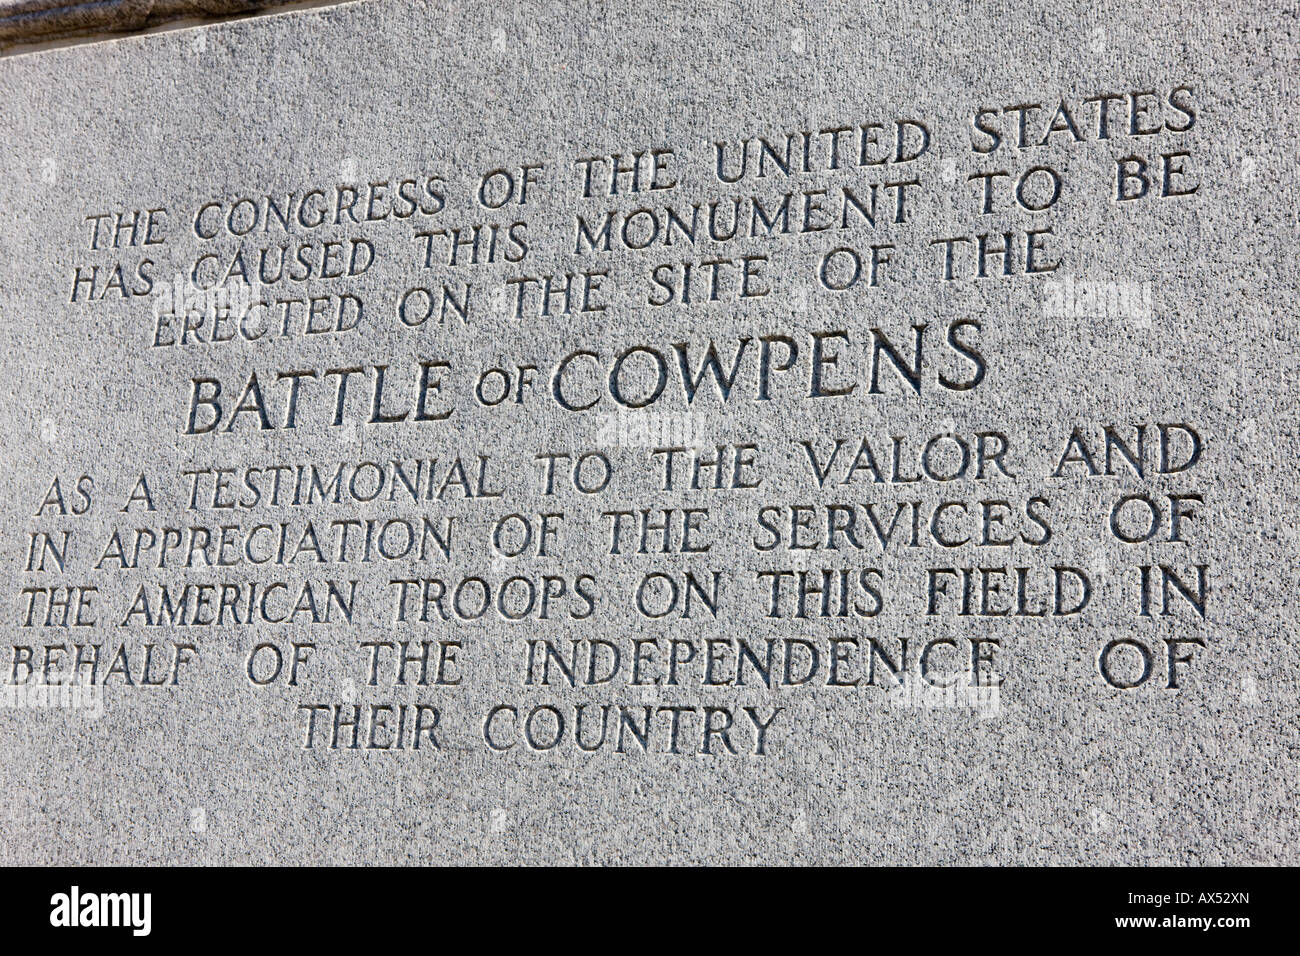 U S Memorial Monument dedicated in 1932 to those who fought at Cowpens National Battlefield Park Cowpens South Carolina Stock Photo